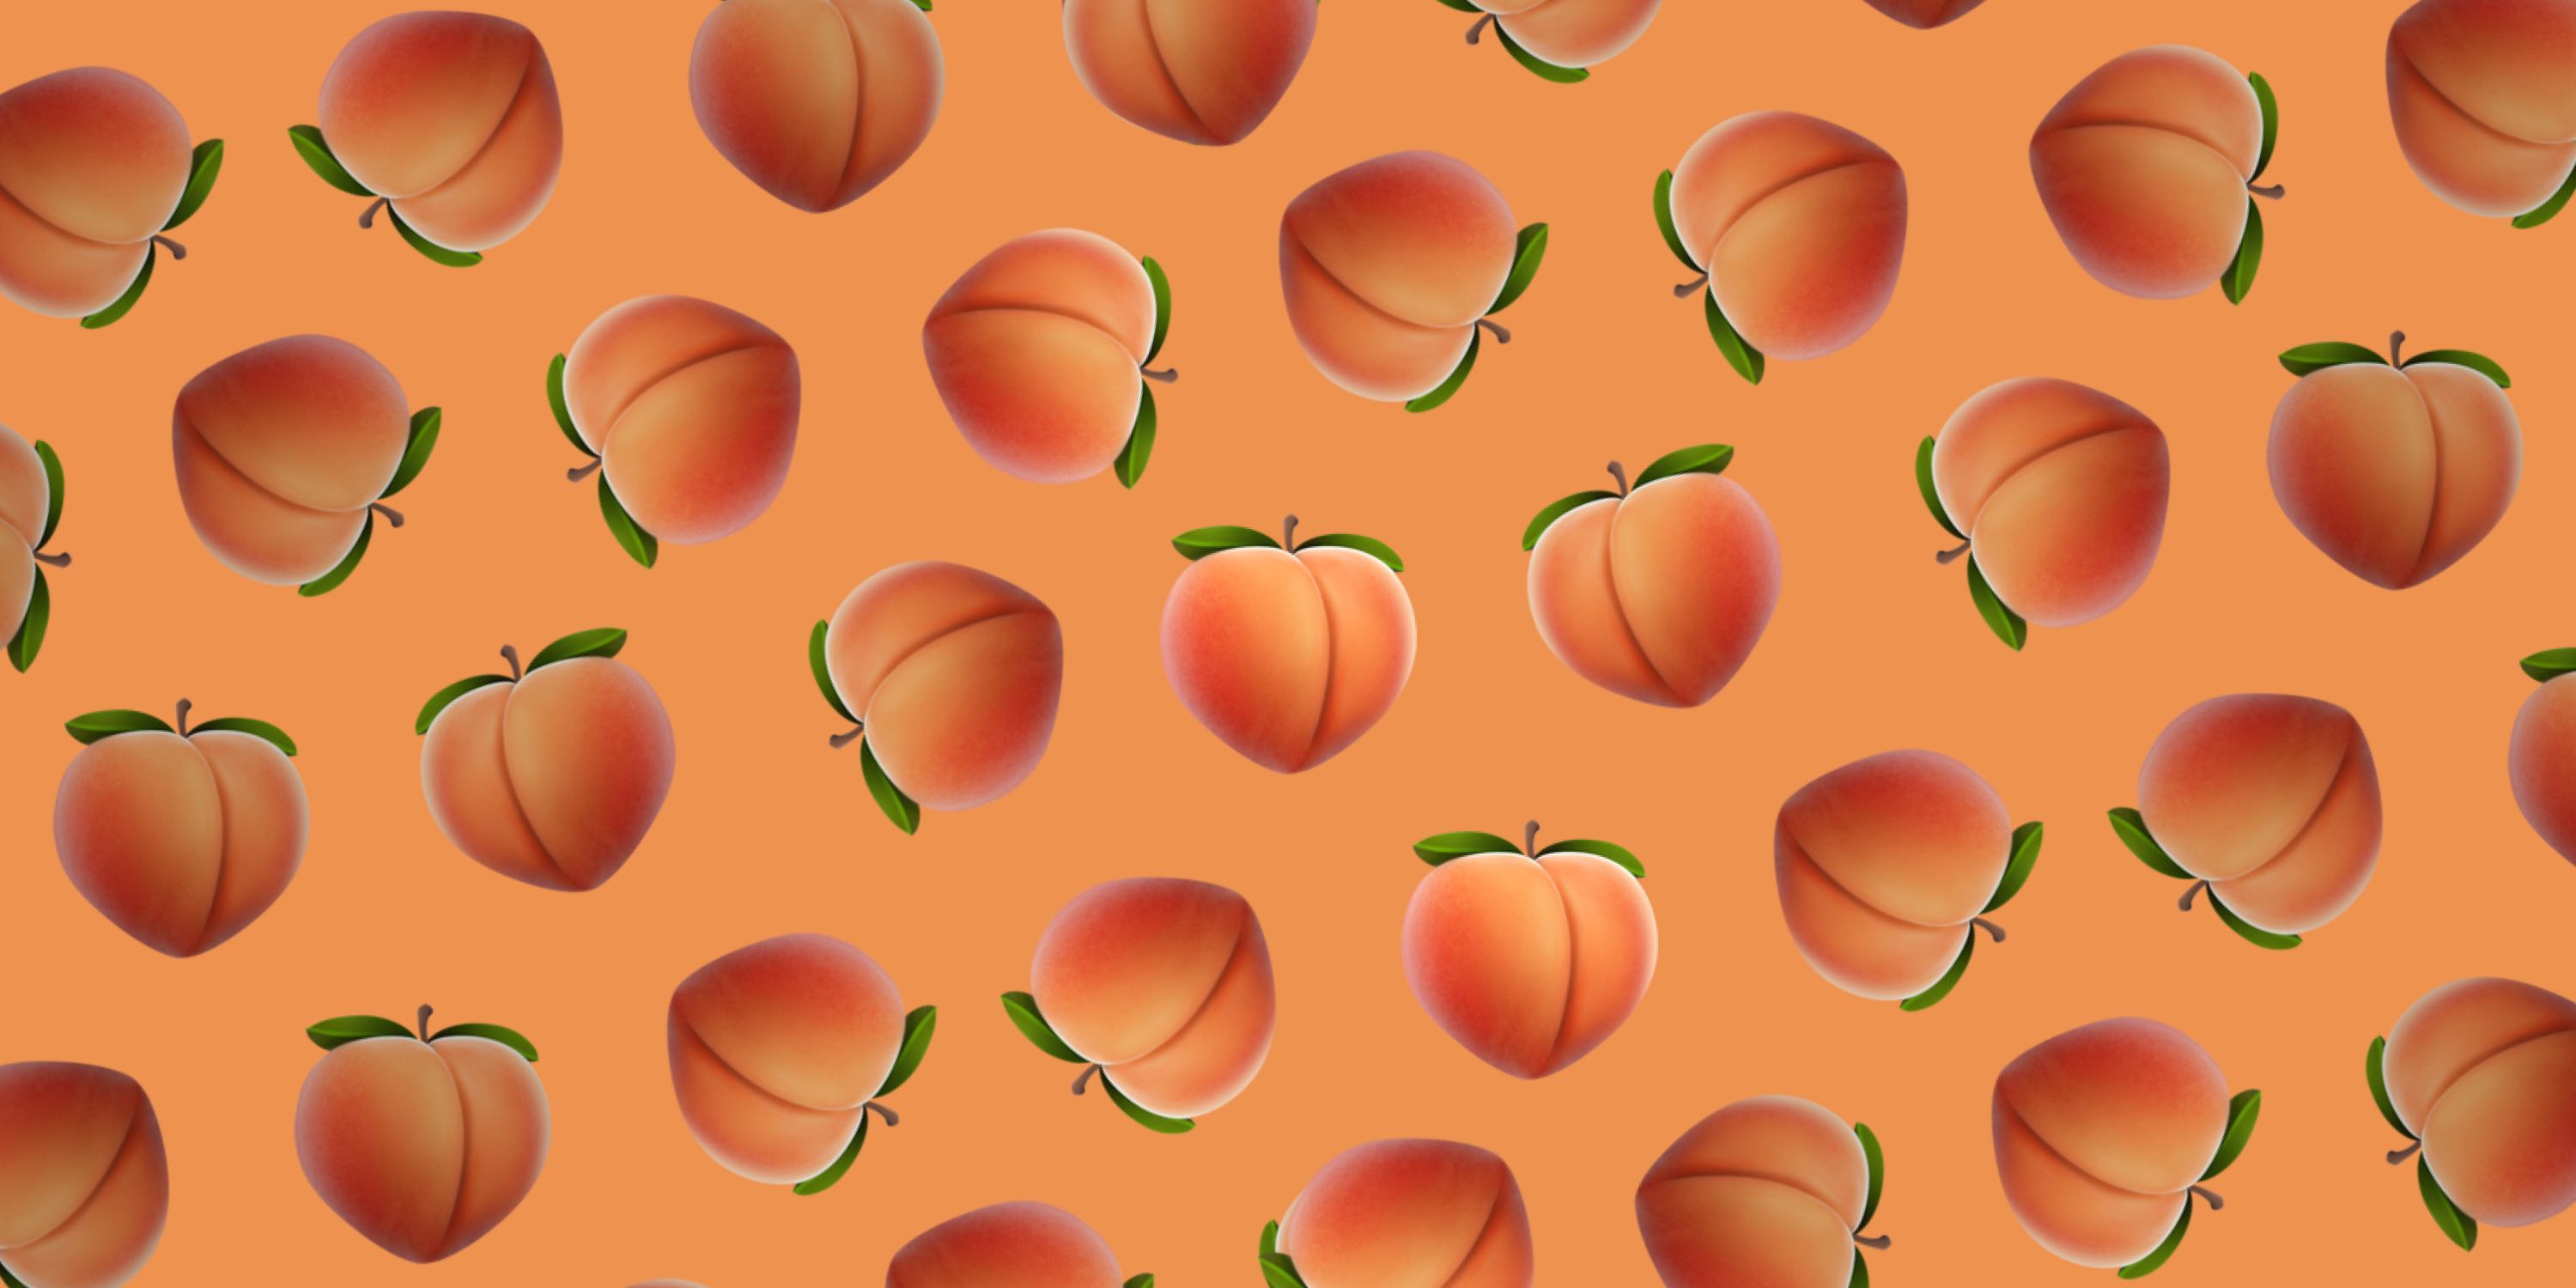 Apple recently came under fire for proposing a change to the 🍑 peach emoji...